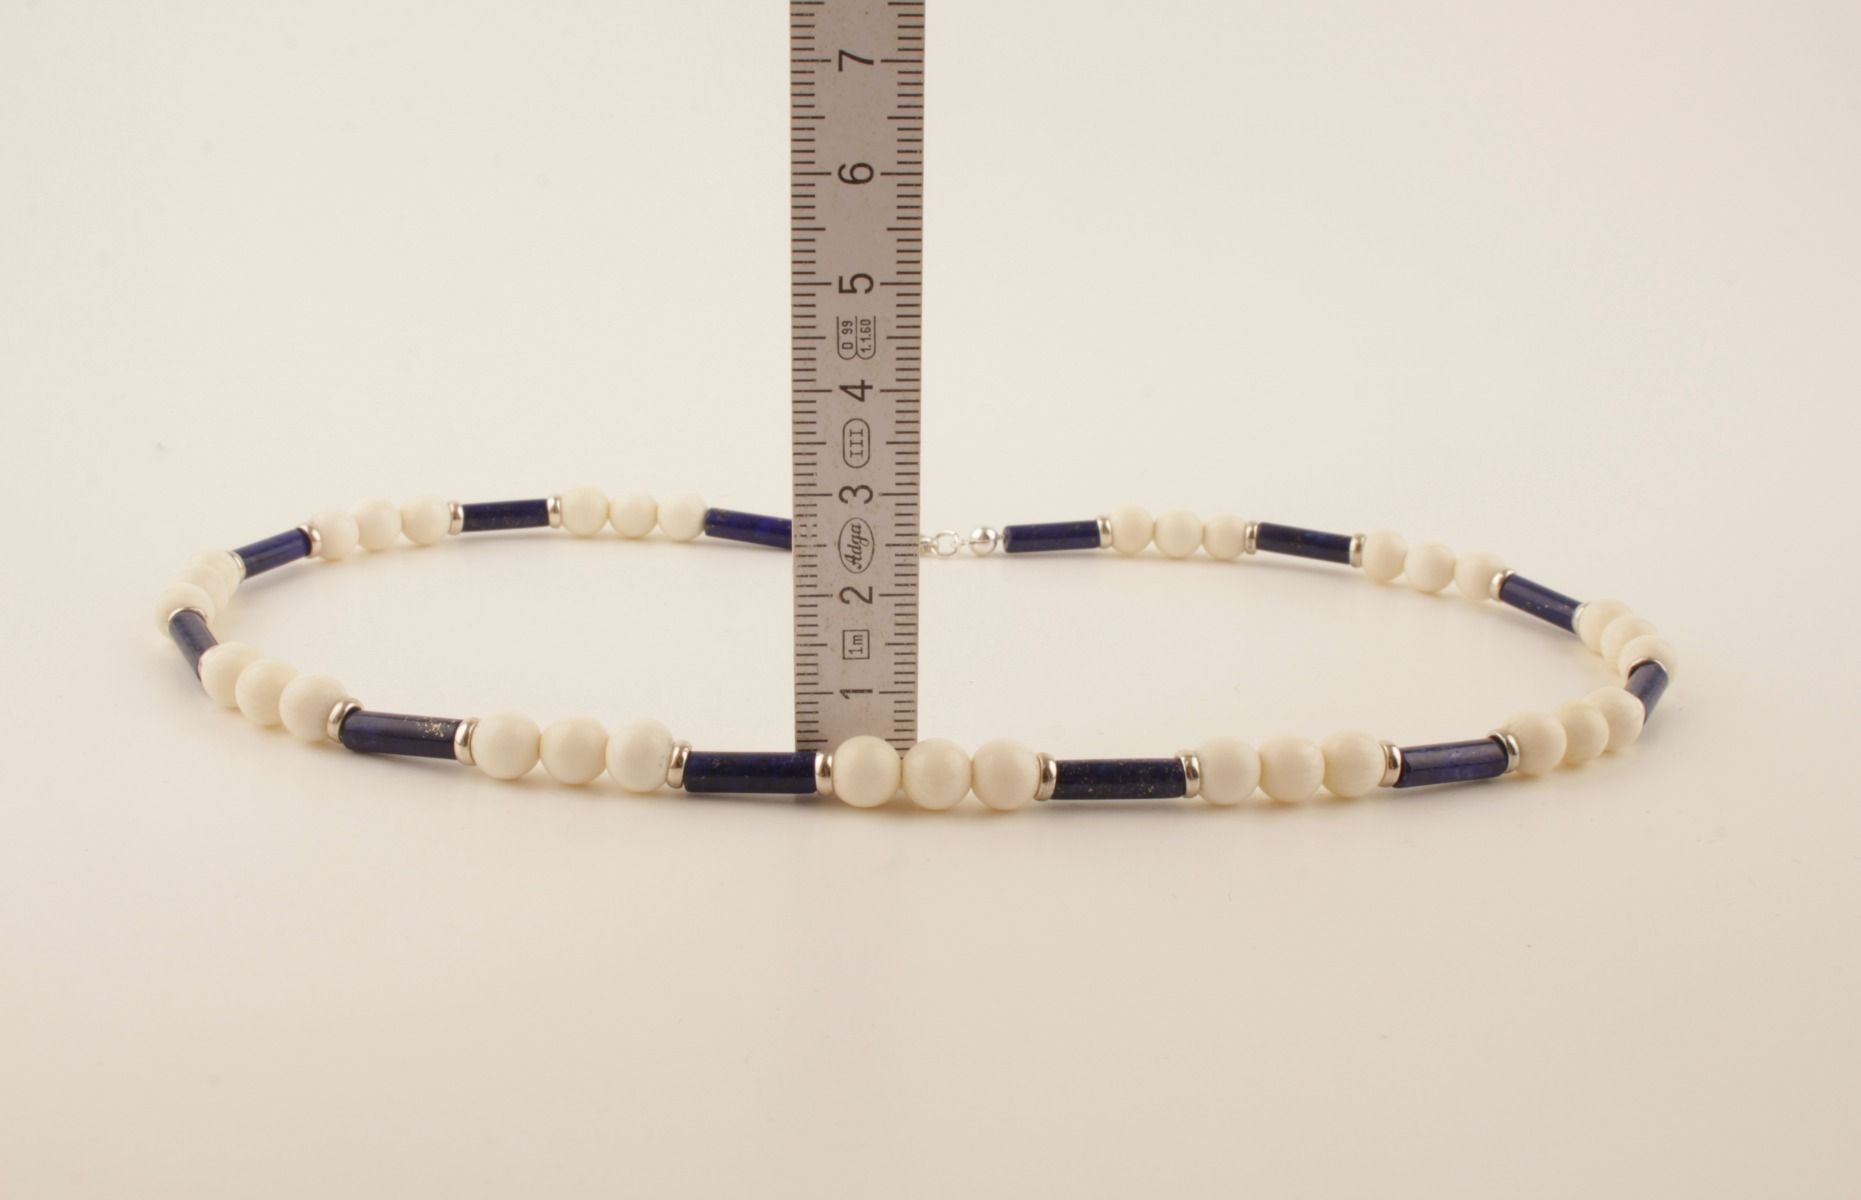 Mammoth Ivory & Blue Agate Necklace